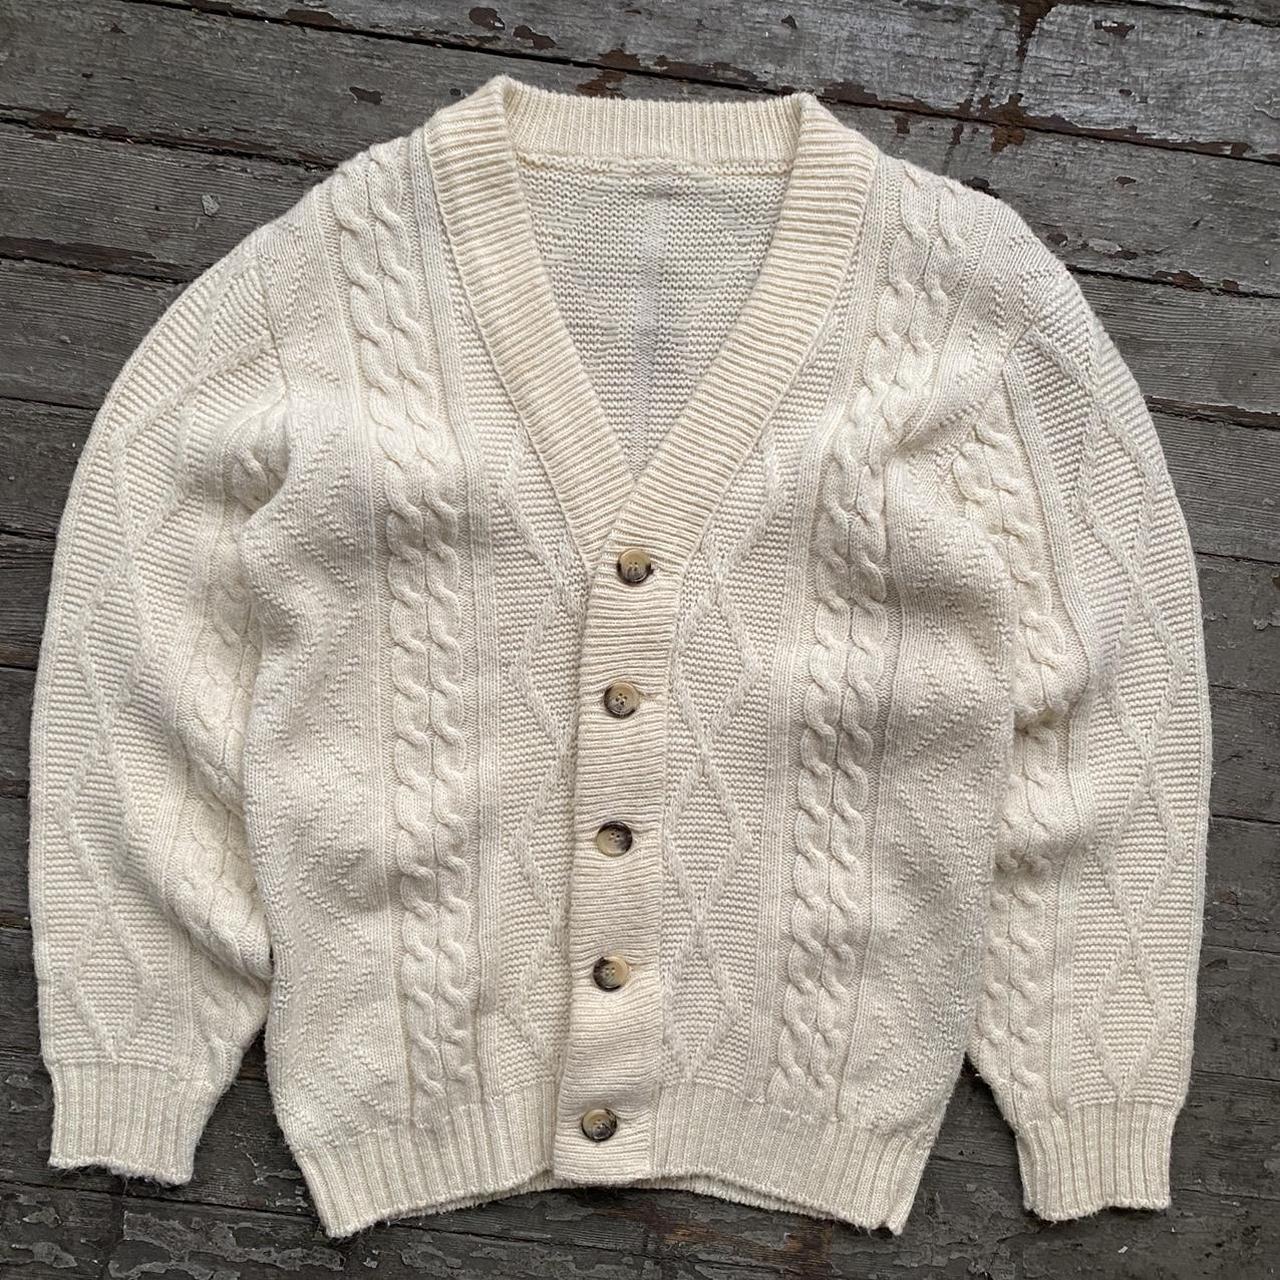 Vintage cable knit cardigan cream. Super chunky,... - Depop